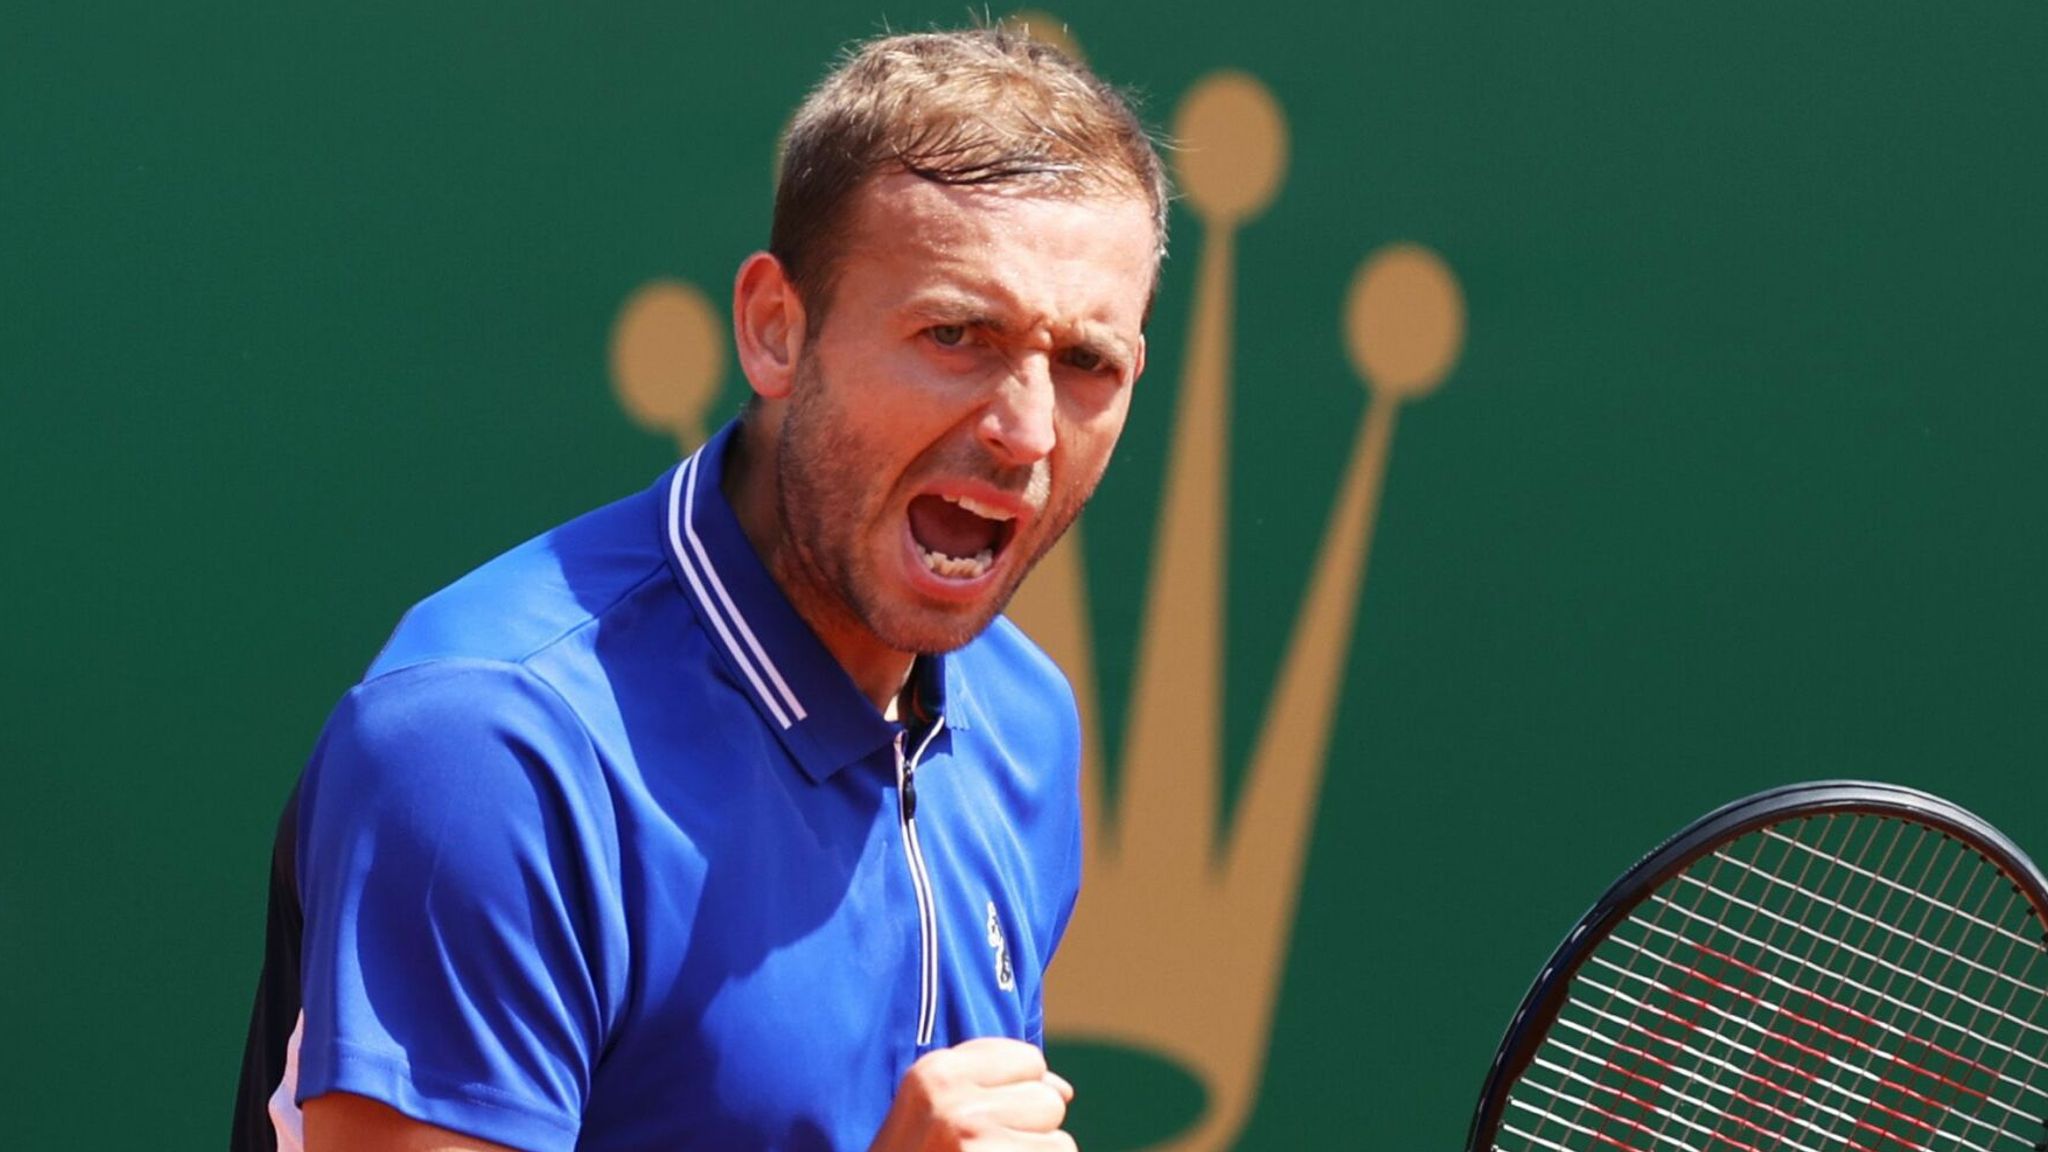 Dan Evans through to the Monte Carlo Masters semi-finals after superb win over David Goffin Tennis News Sky Sports